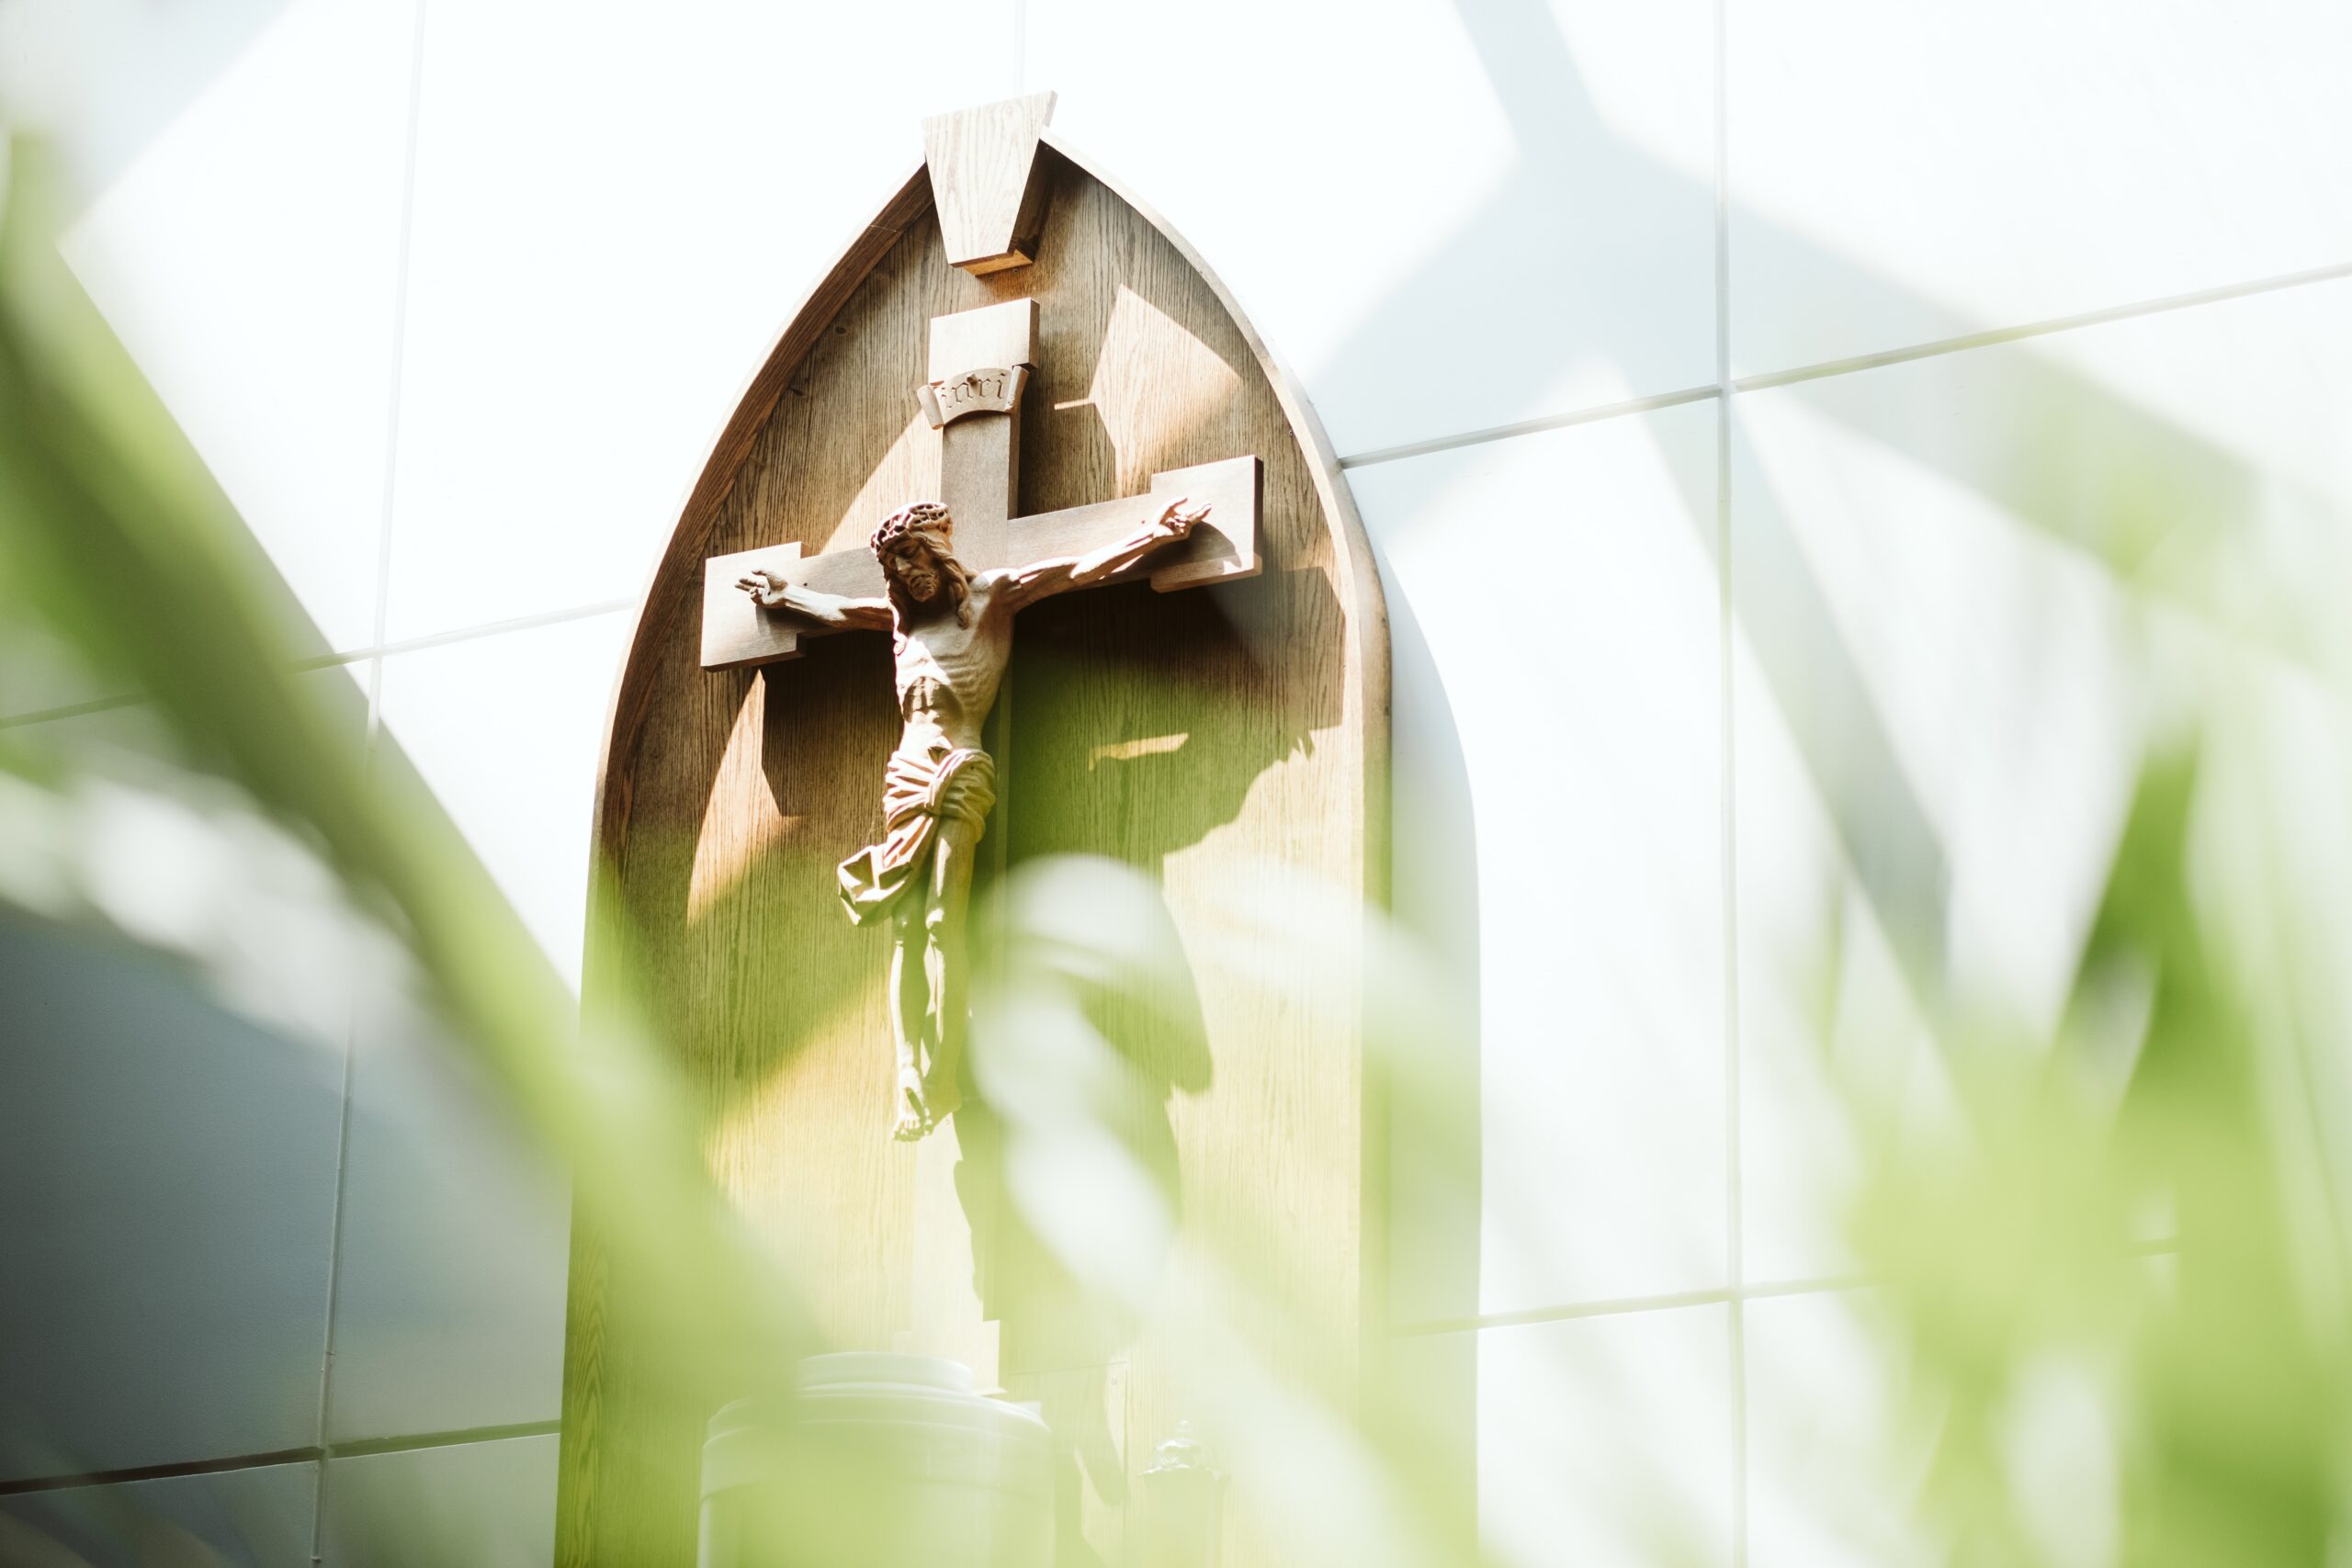 A picture from behind some bushes of a crucifix. Jesus is hanging on the cross with a wooden base behind him.